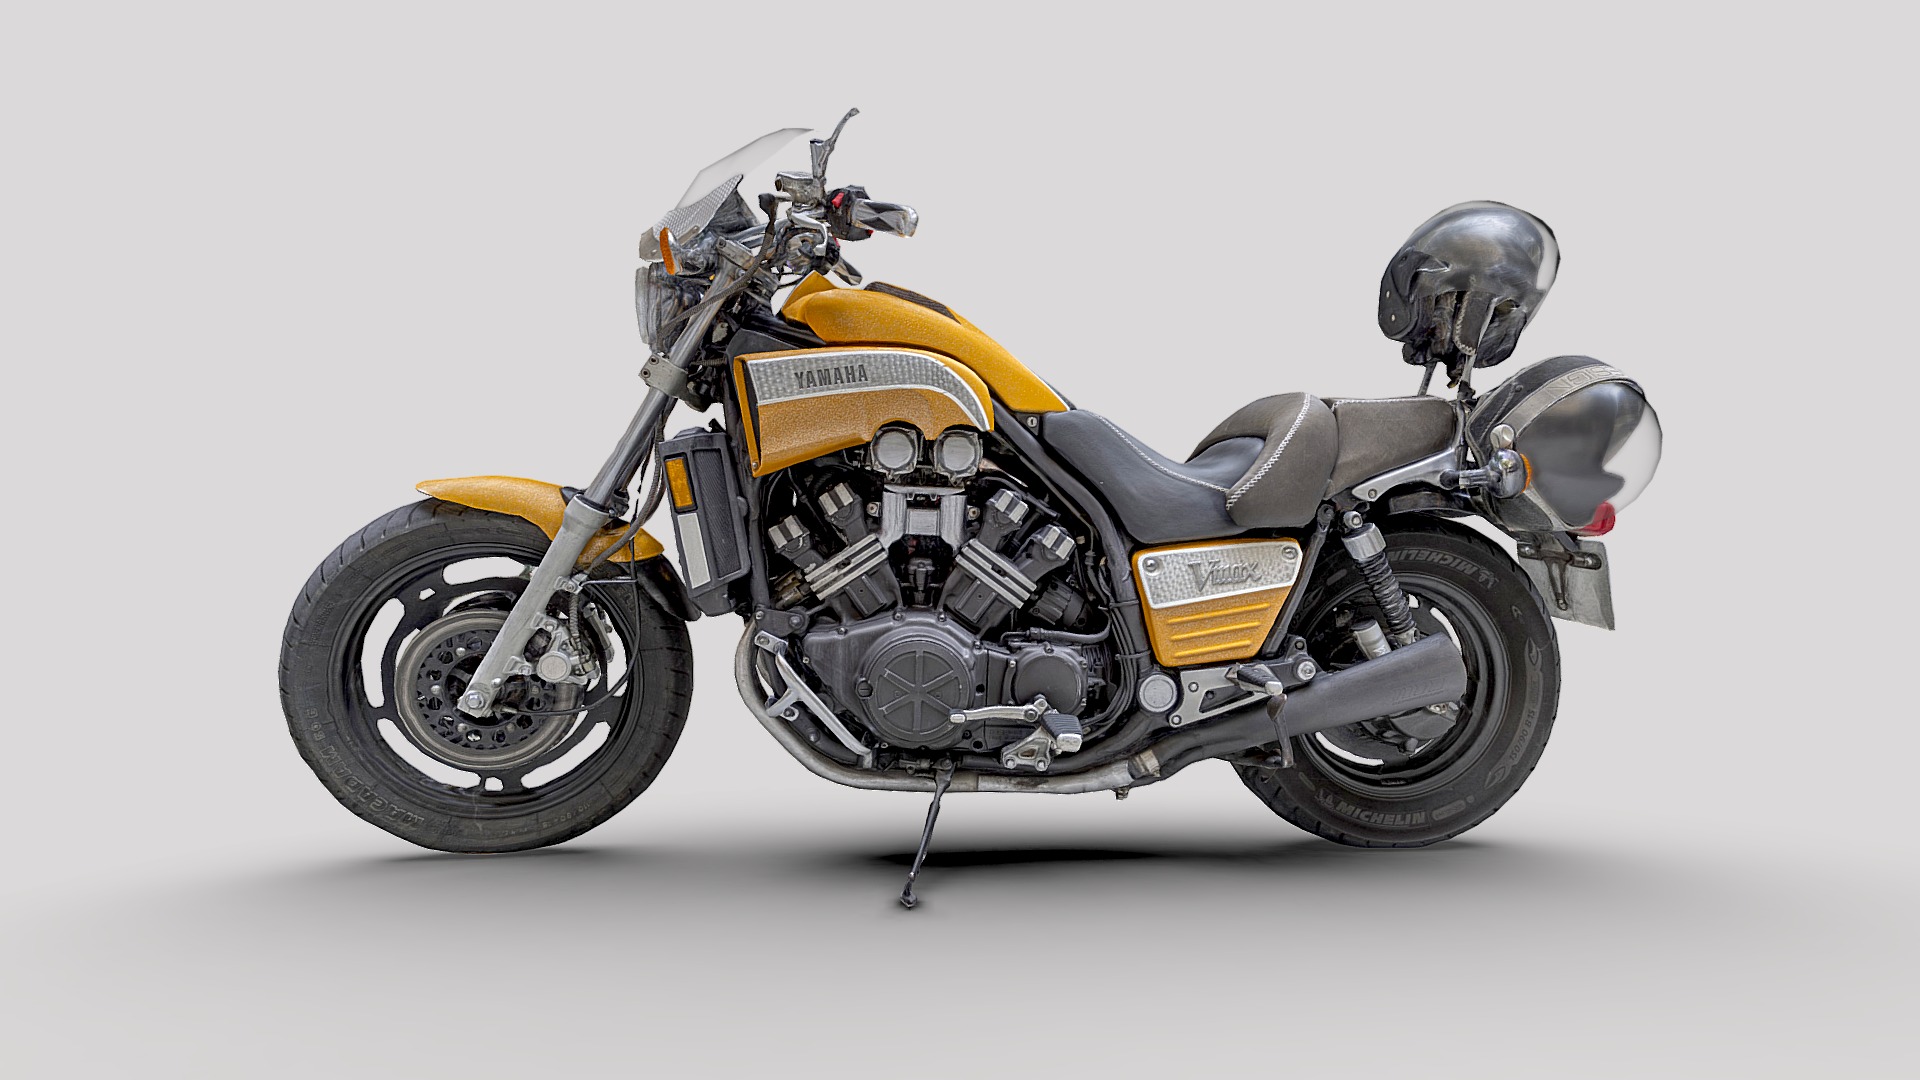 3D model Yamaha VMAX - This is a 3D model of the Yamaha VMAX. The 3D model is about a yellow and black motorcycle.